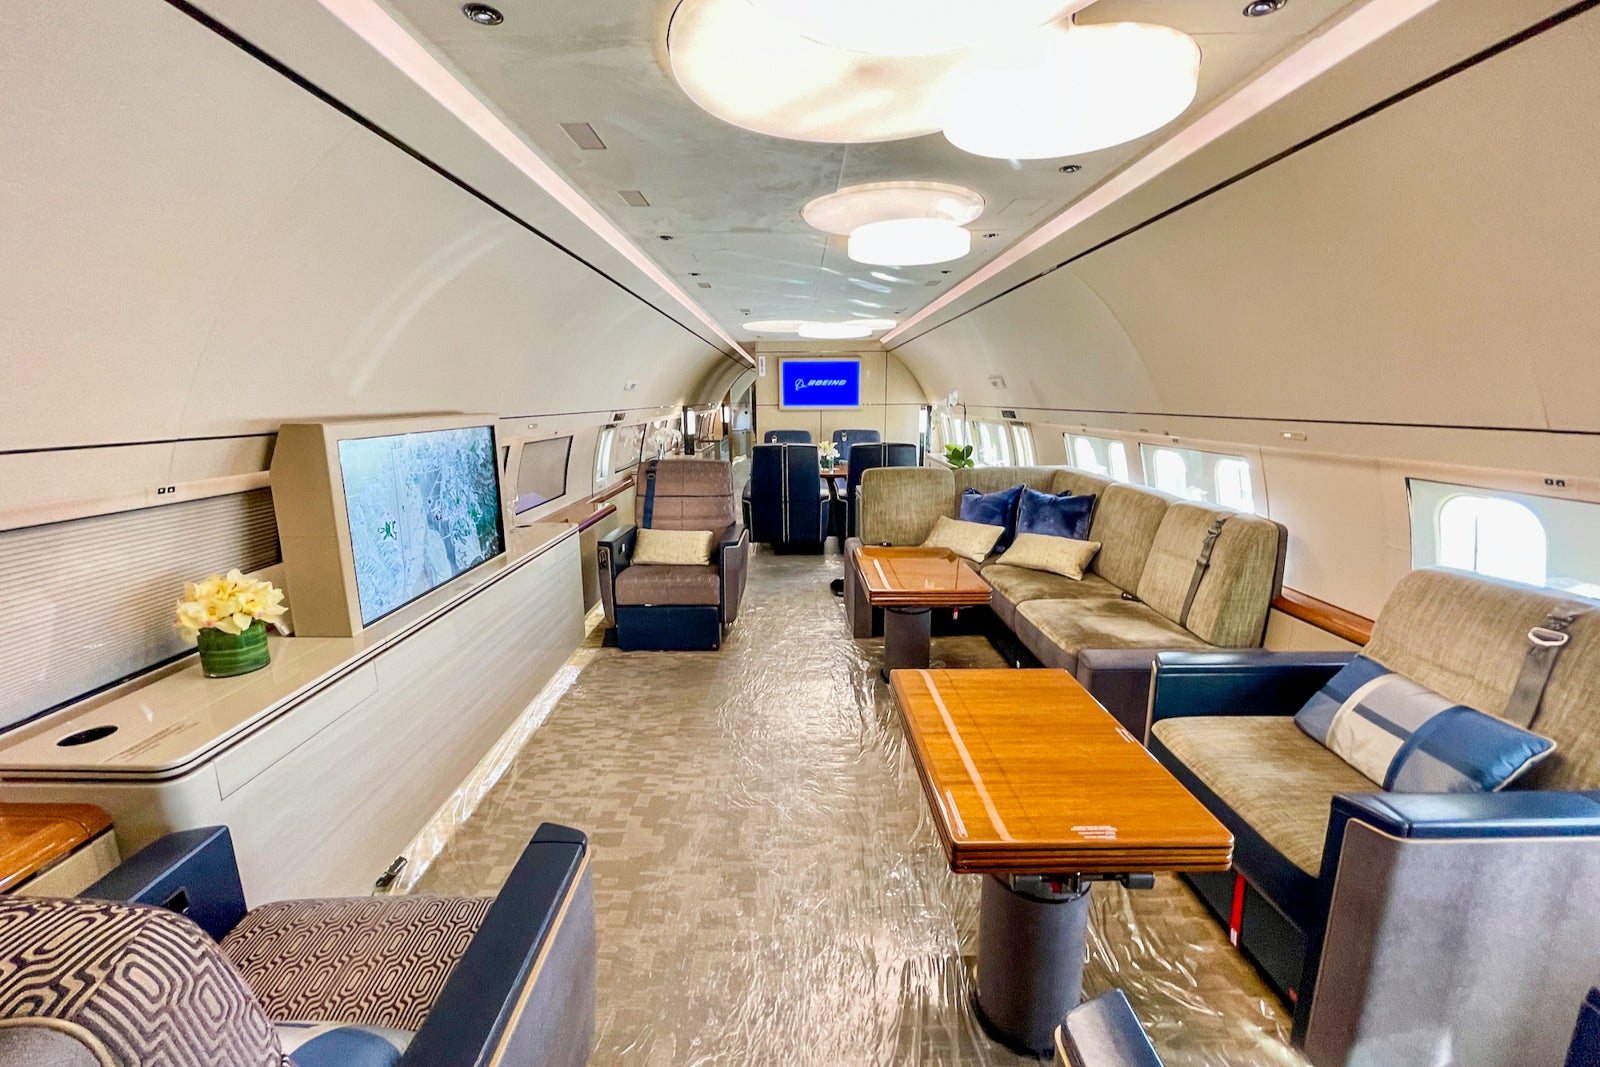 Dassault Falcon 10X Business Aircraft has the Largest Interior in its Class  | Aircraft, Private aircraft, Luxury private jets